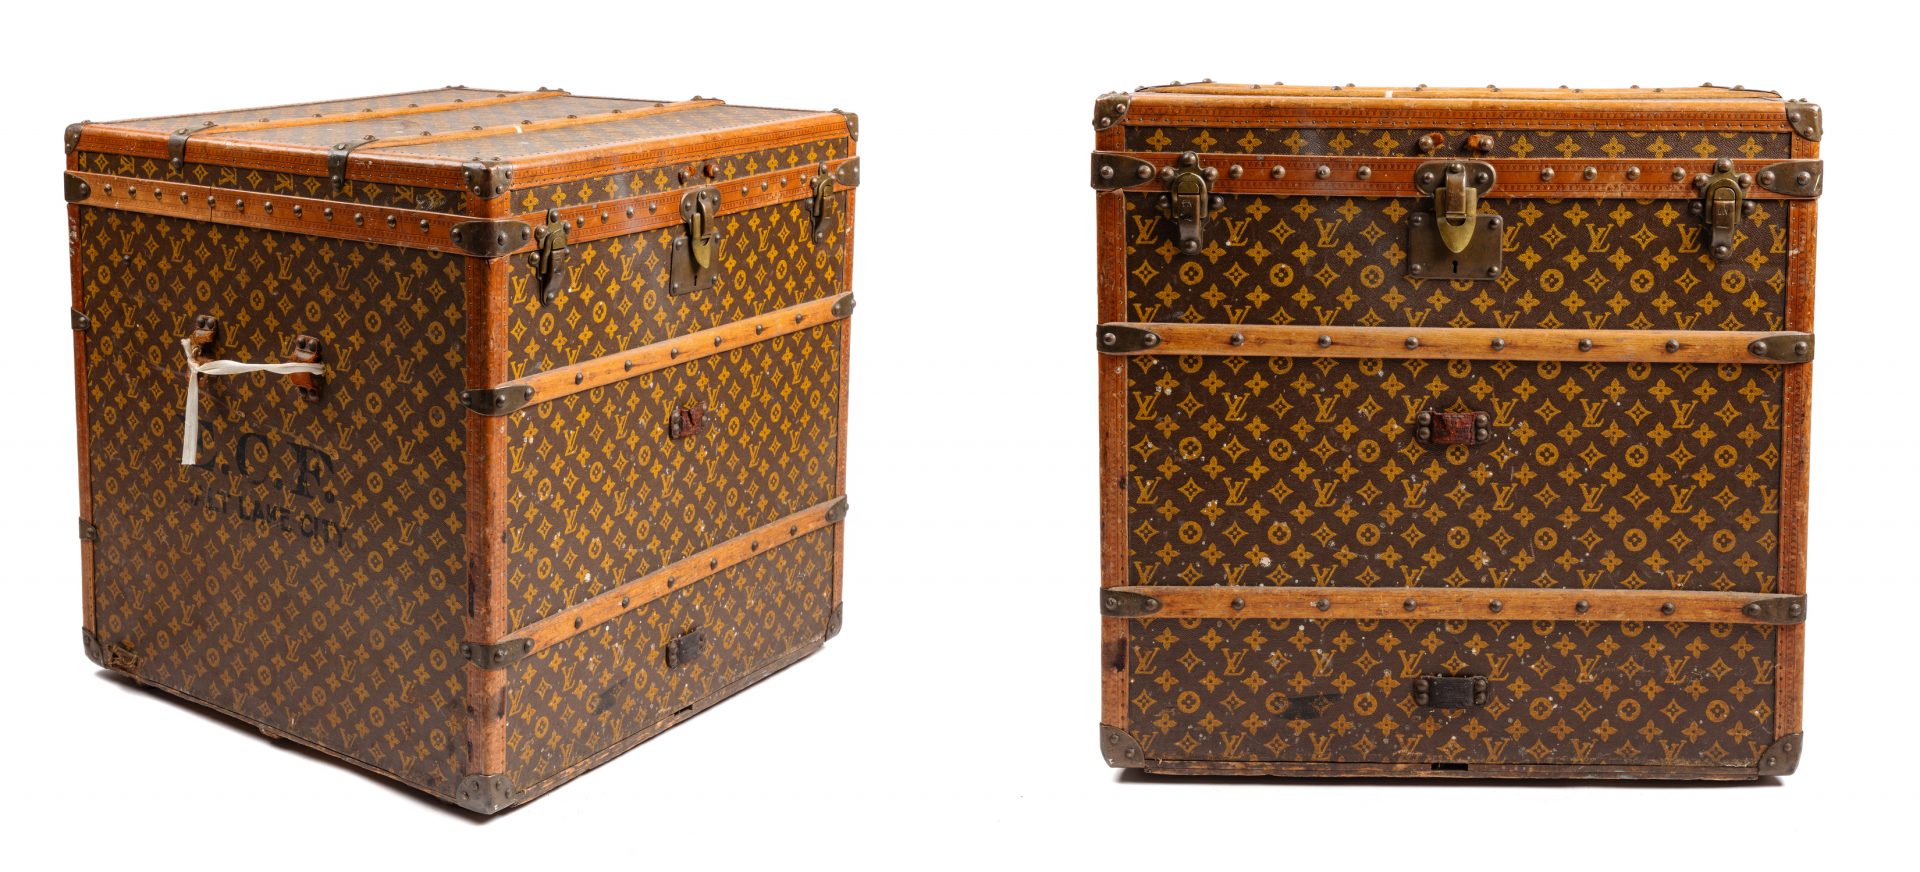 Louis Vuitton: How it transformed from trunk maker to luxury